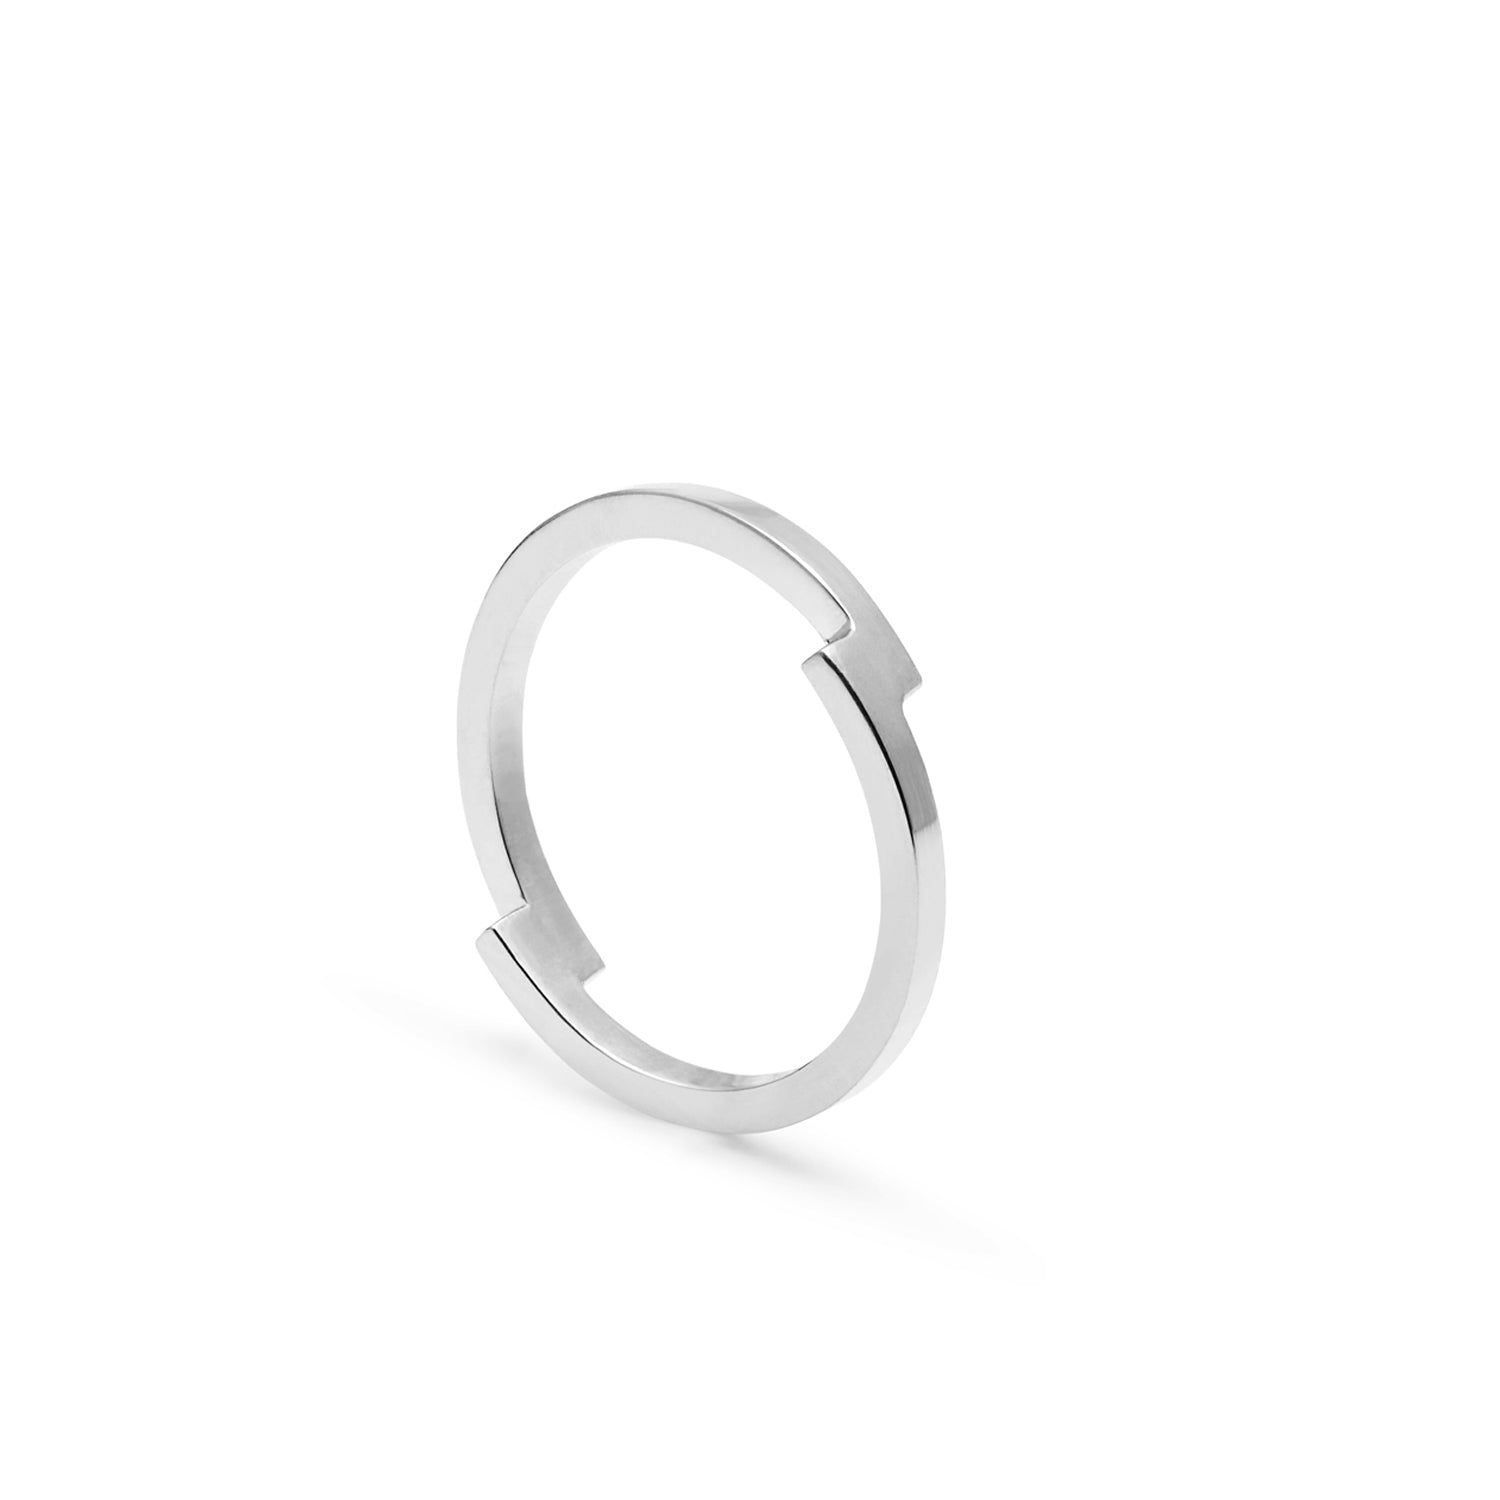 Double Arc Ring - Silver - Myia Bonner Jewellery